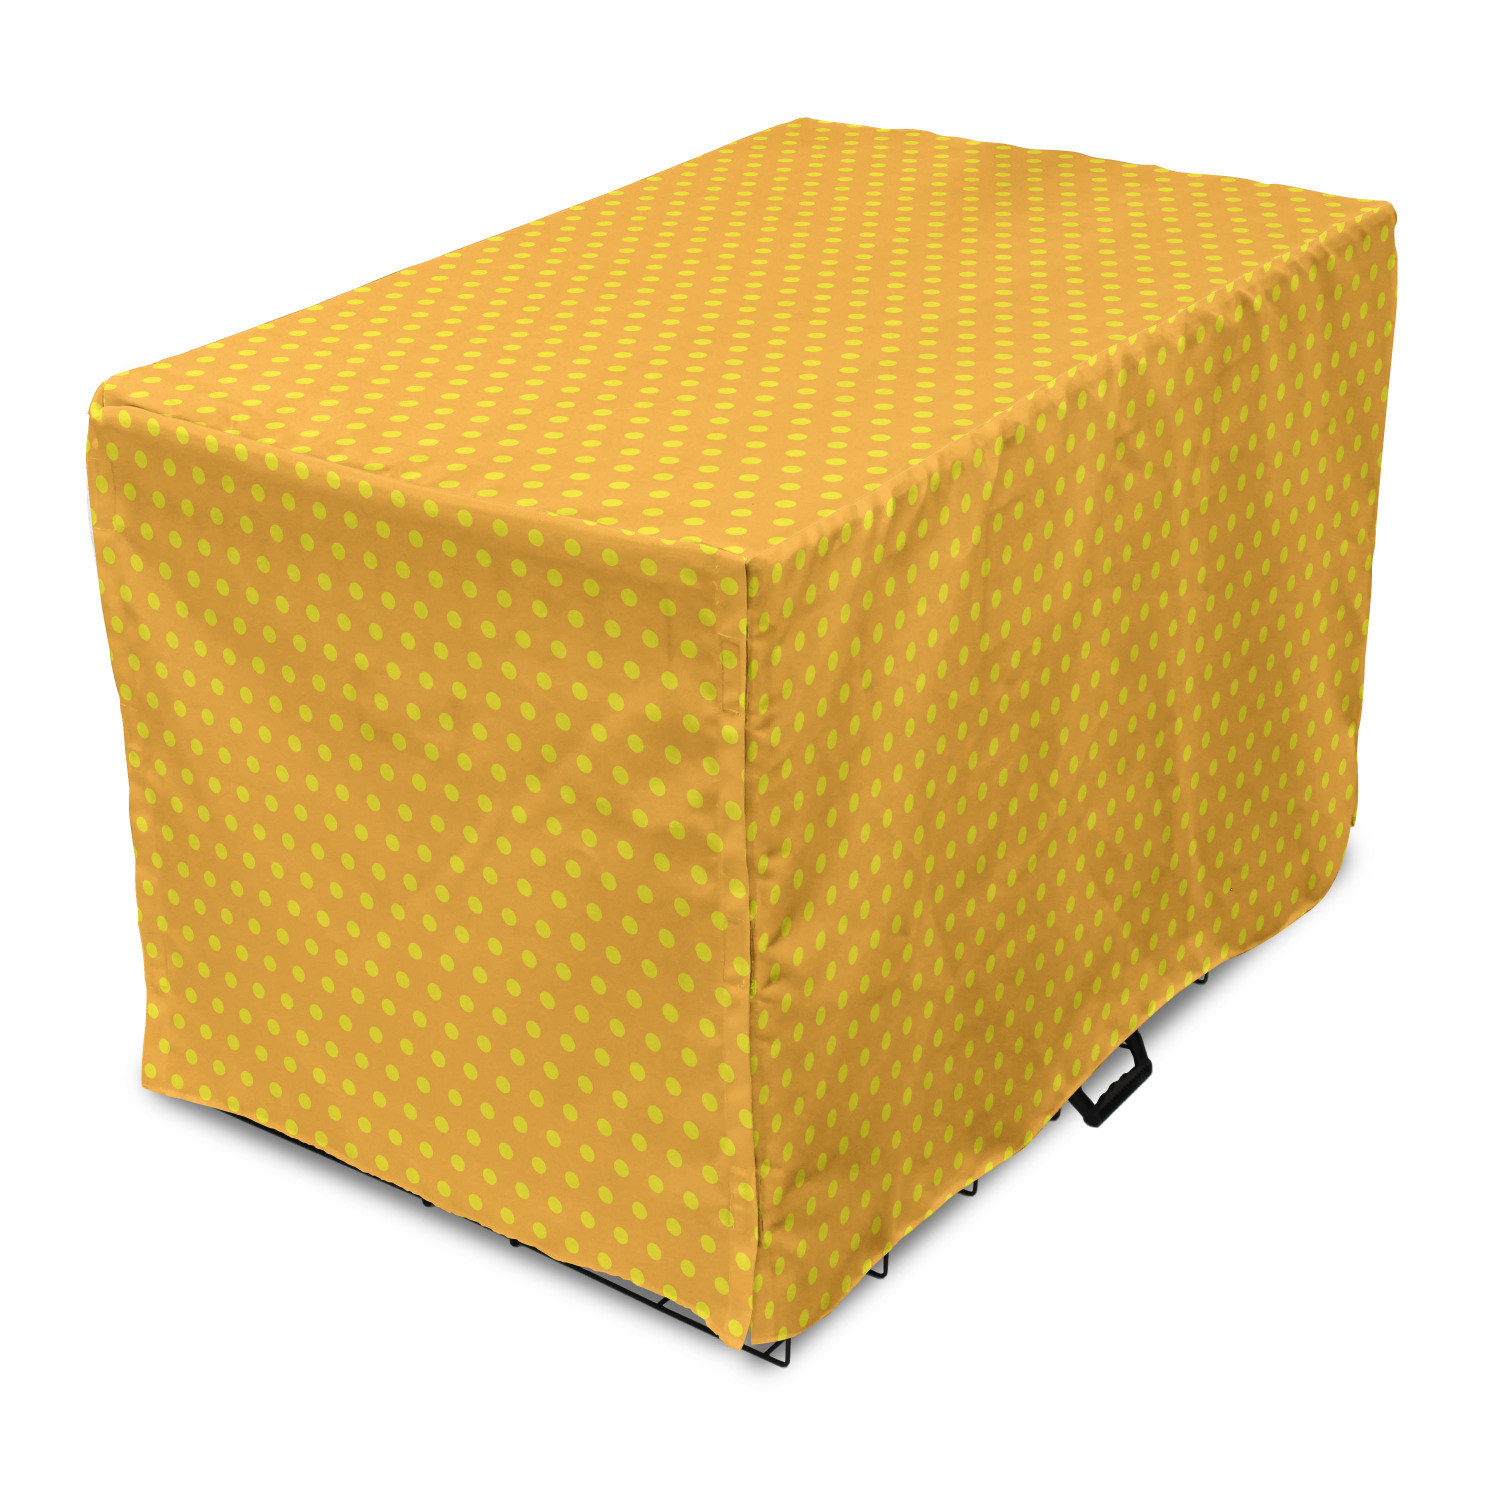 Pop Art Dog Crate Cover, Vintage Retro 50s 60s Image with Polka Dots Pattern Design Print, Easy to Use Pet Kennel Cover for Medium Large Dogs, 35" x 23" x 27", Marigold and Yellow, by Ambesonne - image 1 of 6